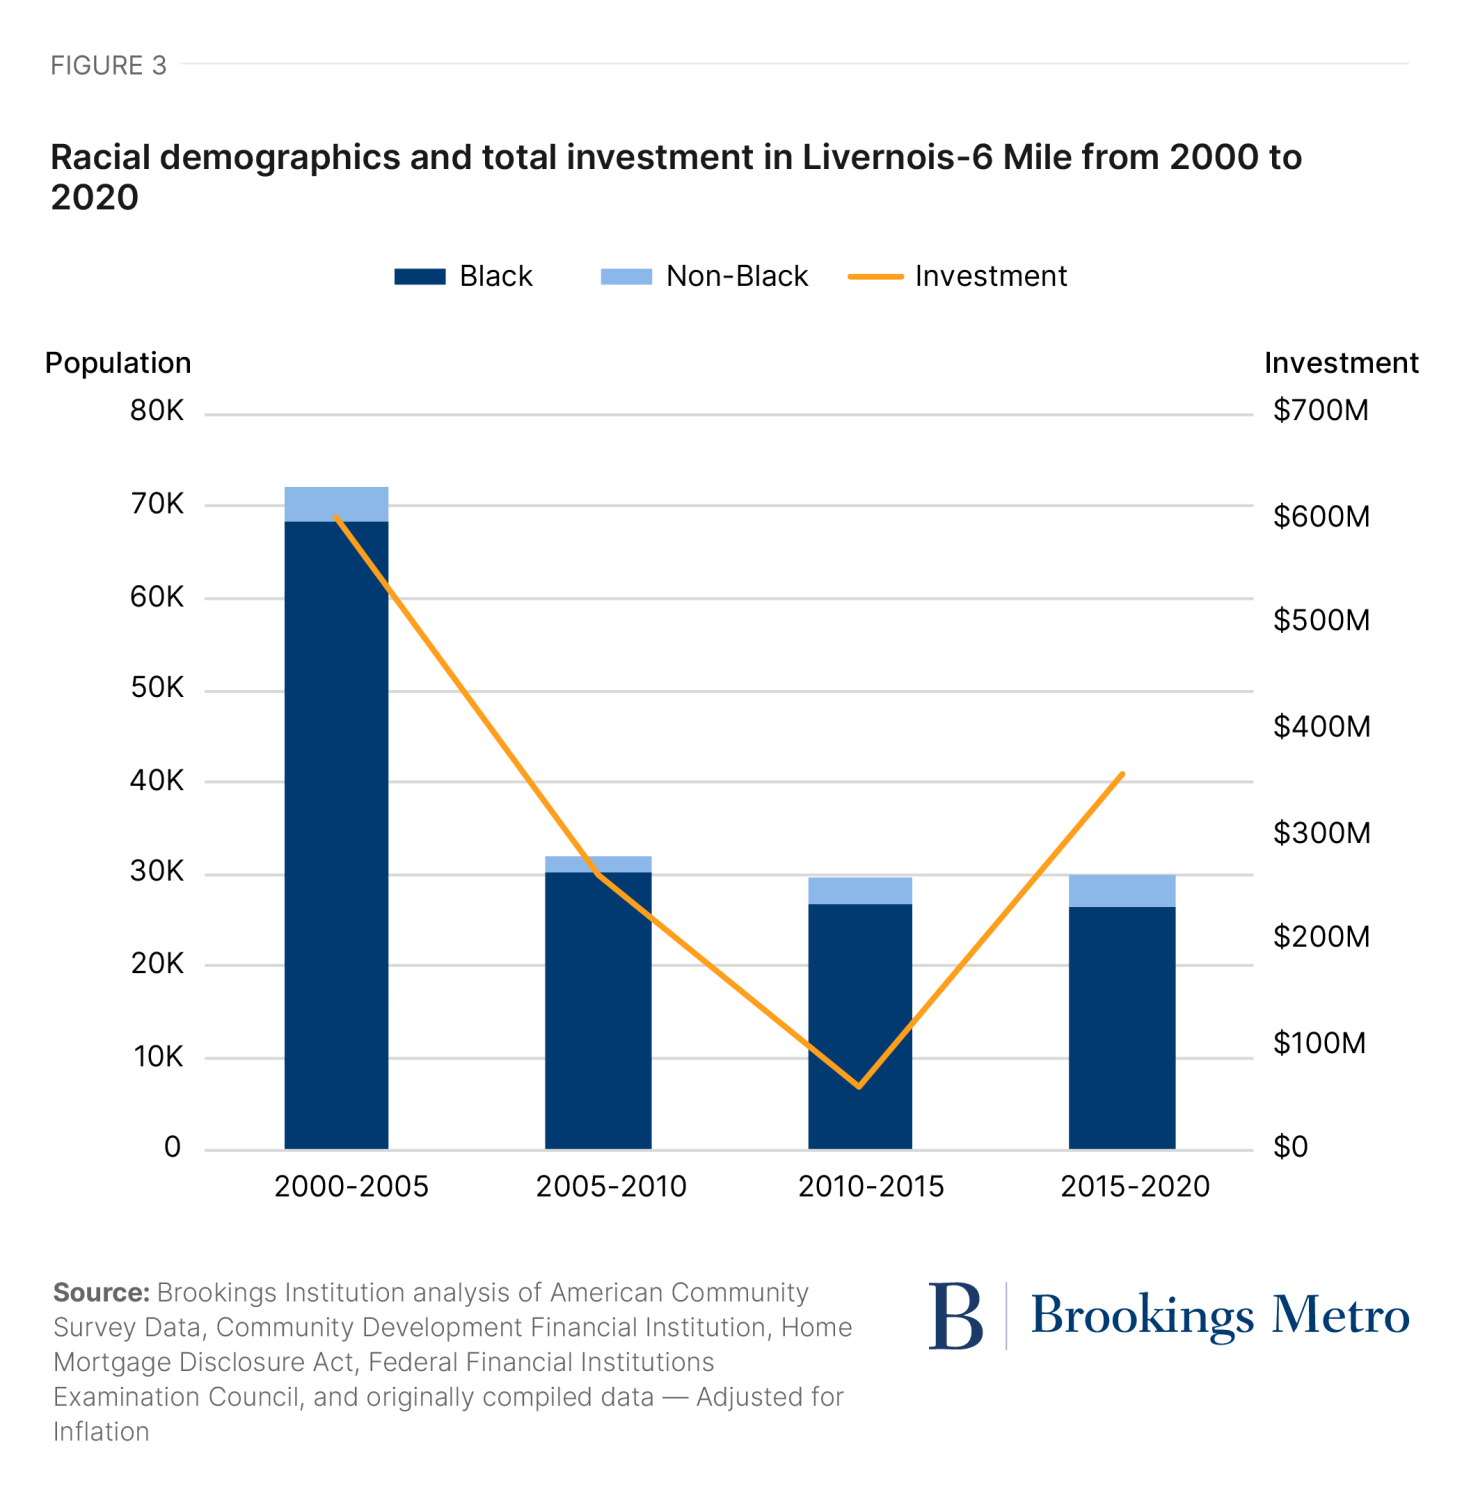 Figure 3. Racial demographics and total investment in Livernois-6 Mile from 2000 to 2020